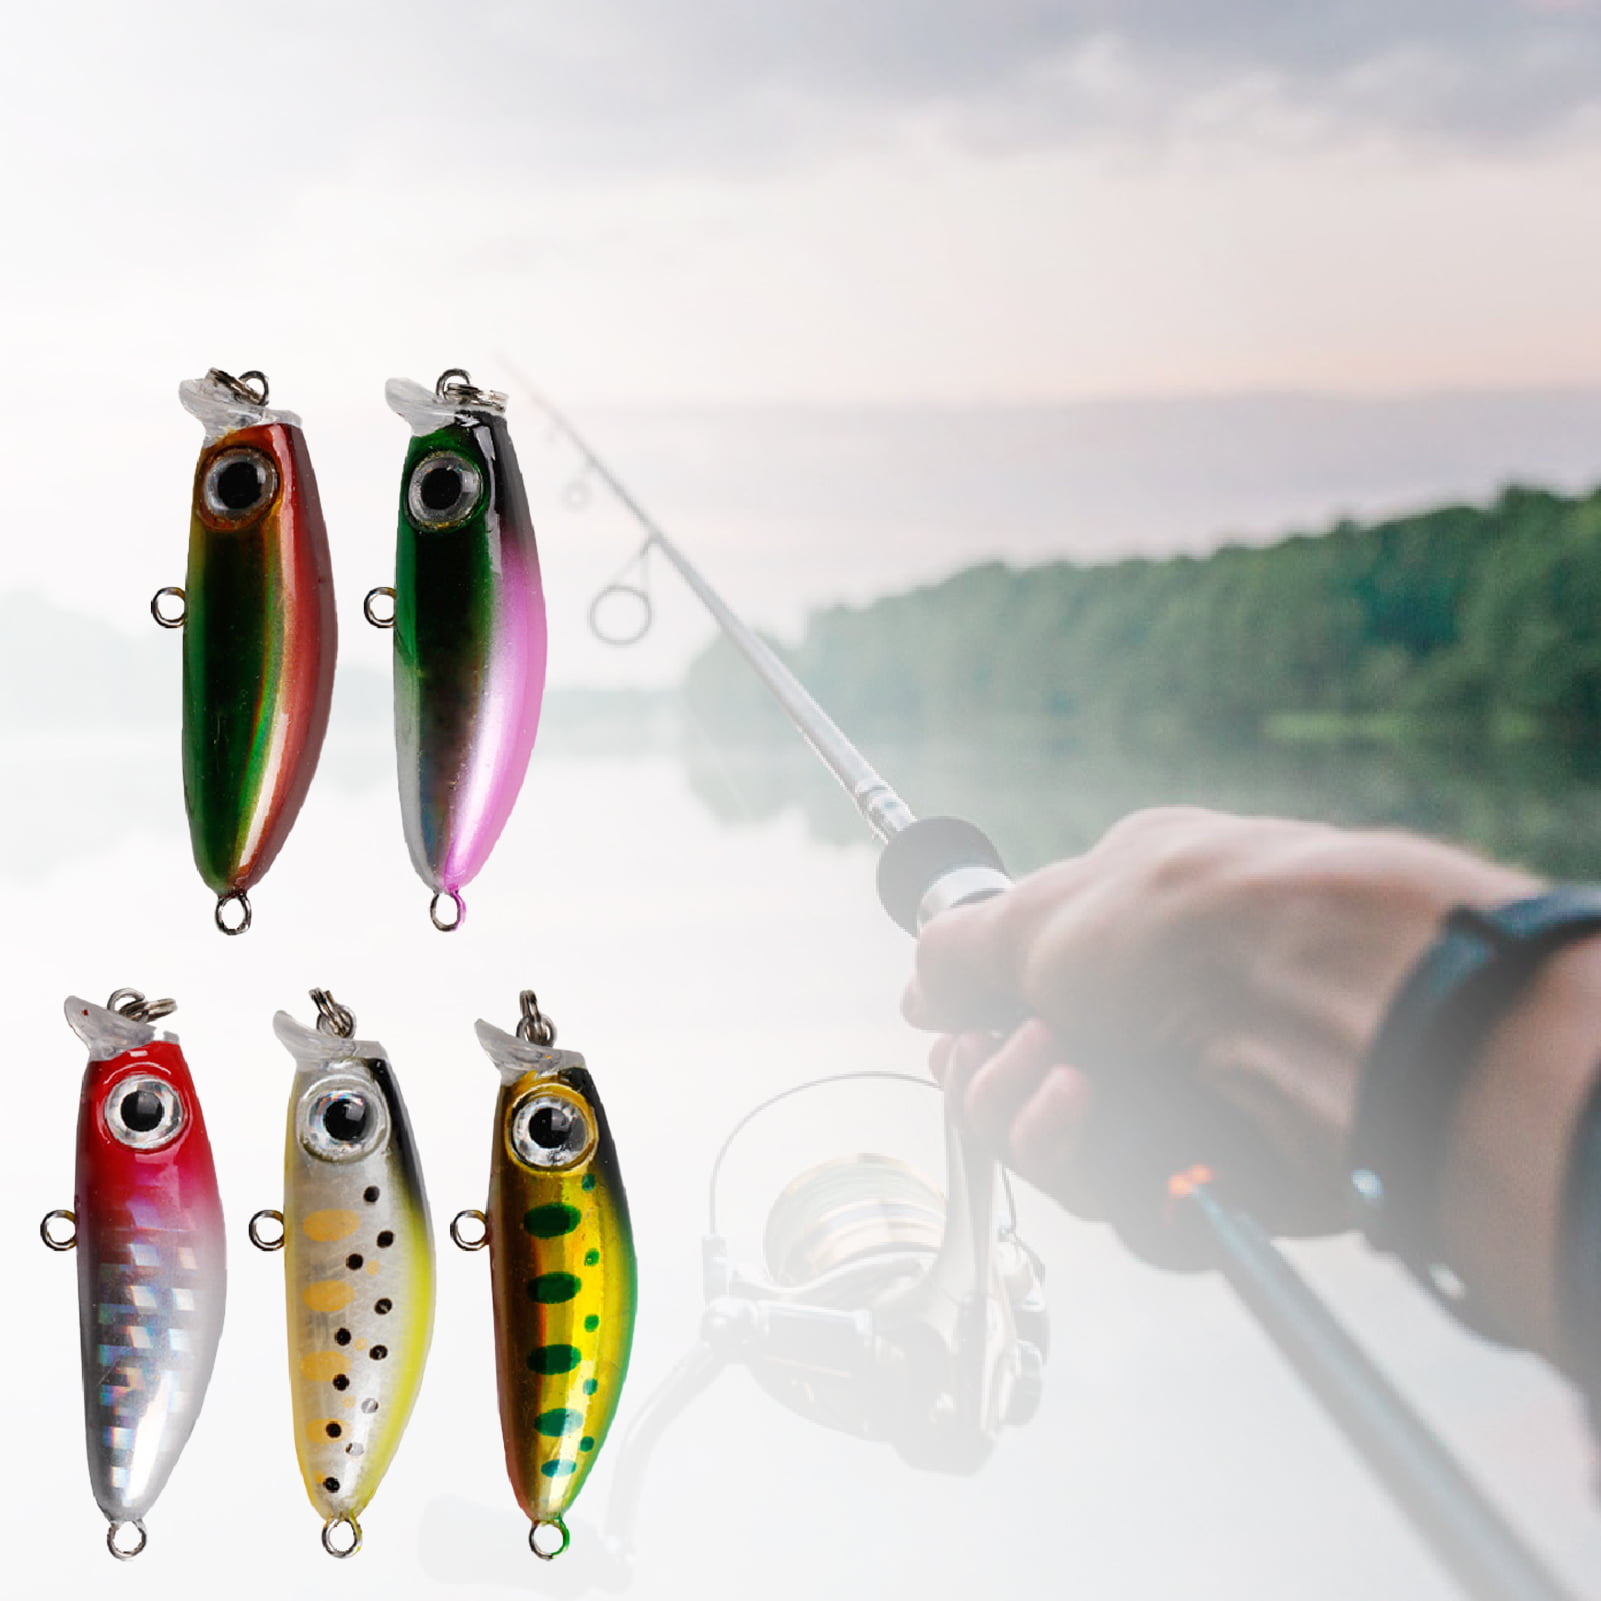 Swimbait Lure from Spinning Rubber Fishy Fake Fishing for Bass Trout Bass 